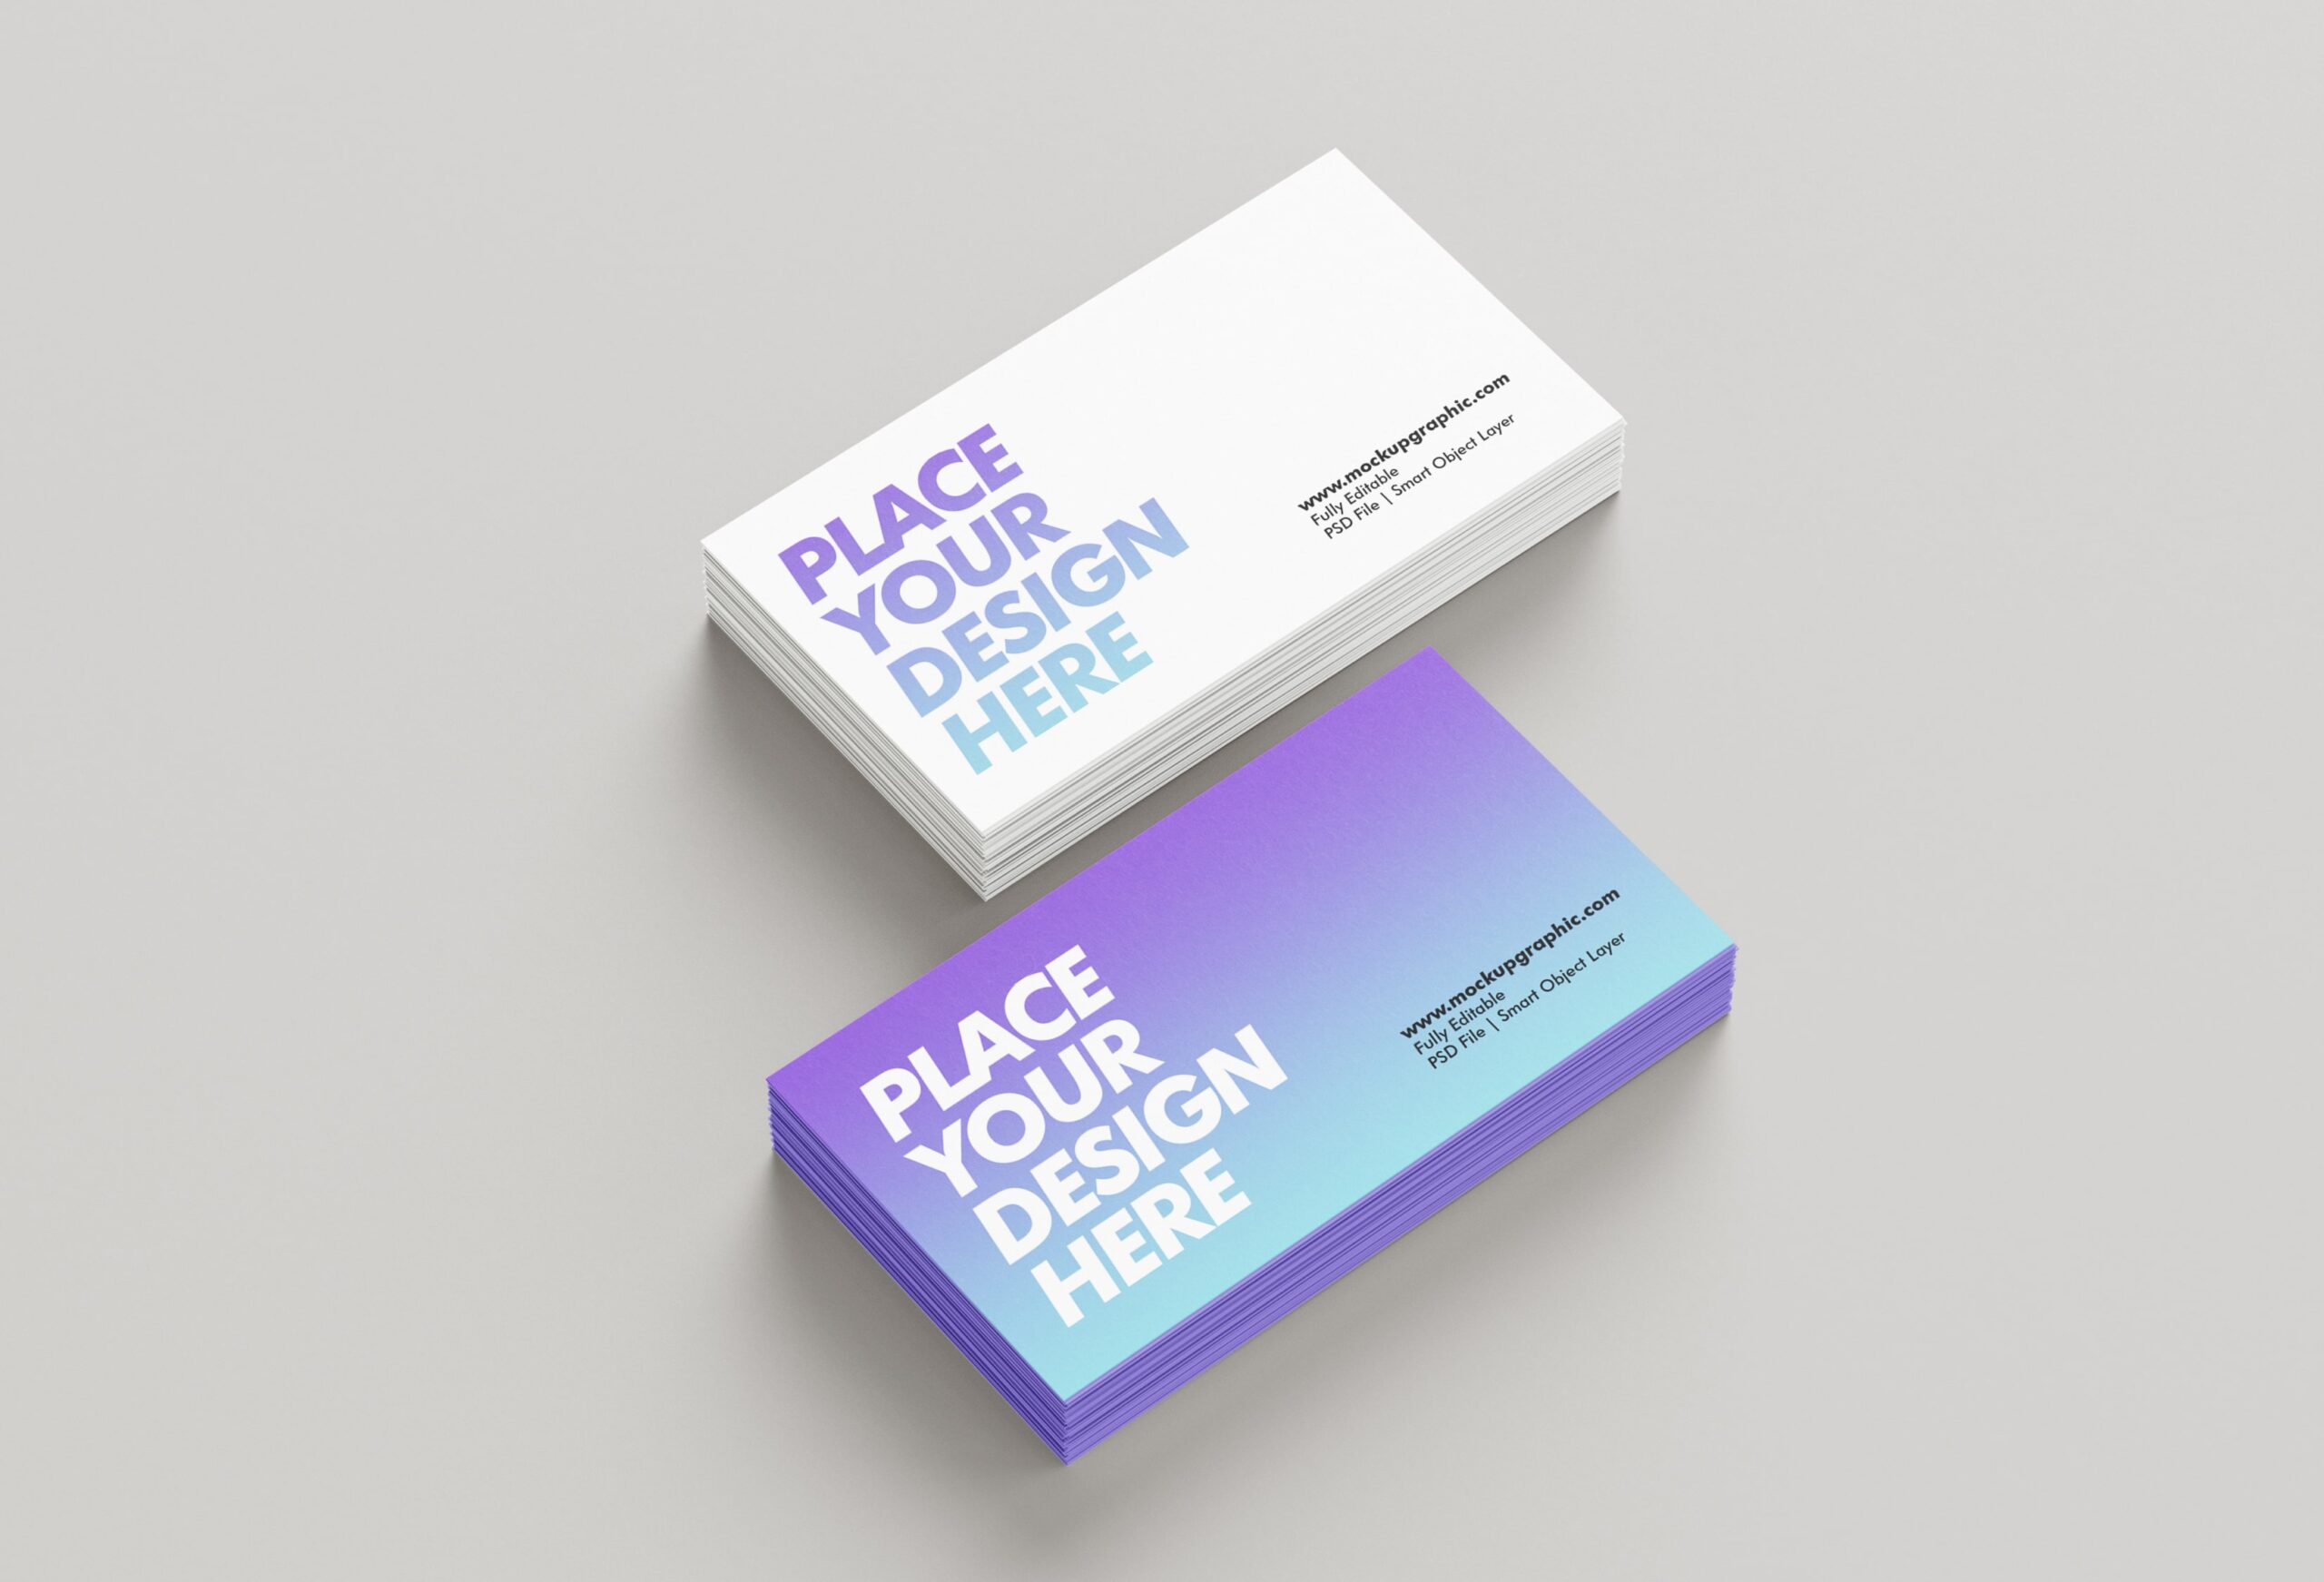 Free_Two_Business_Card_Mockup_Design_www.mockupgraphic.com